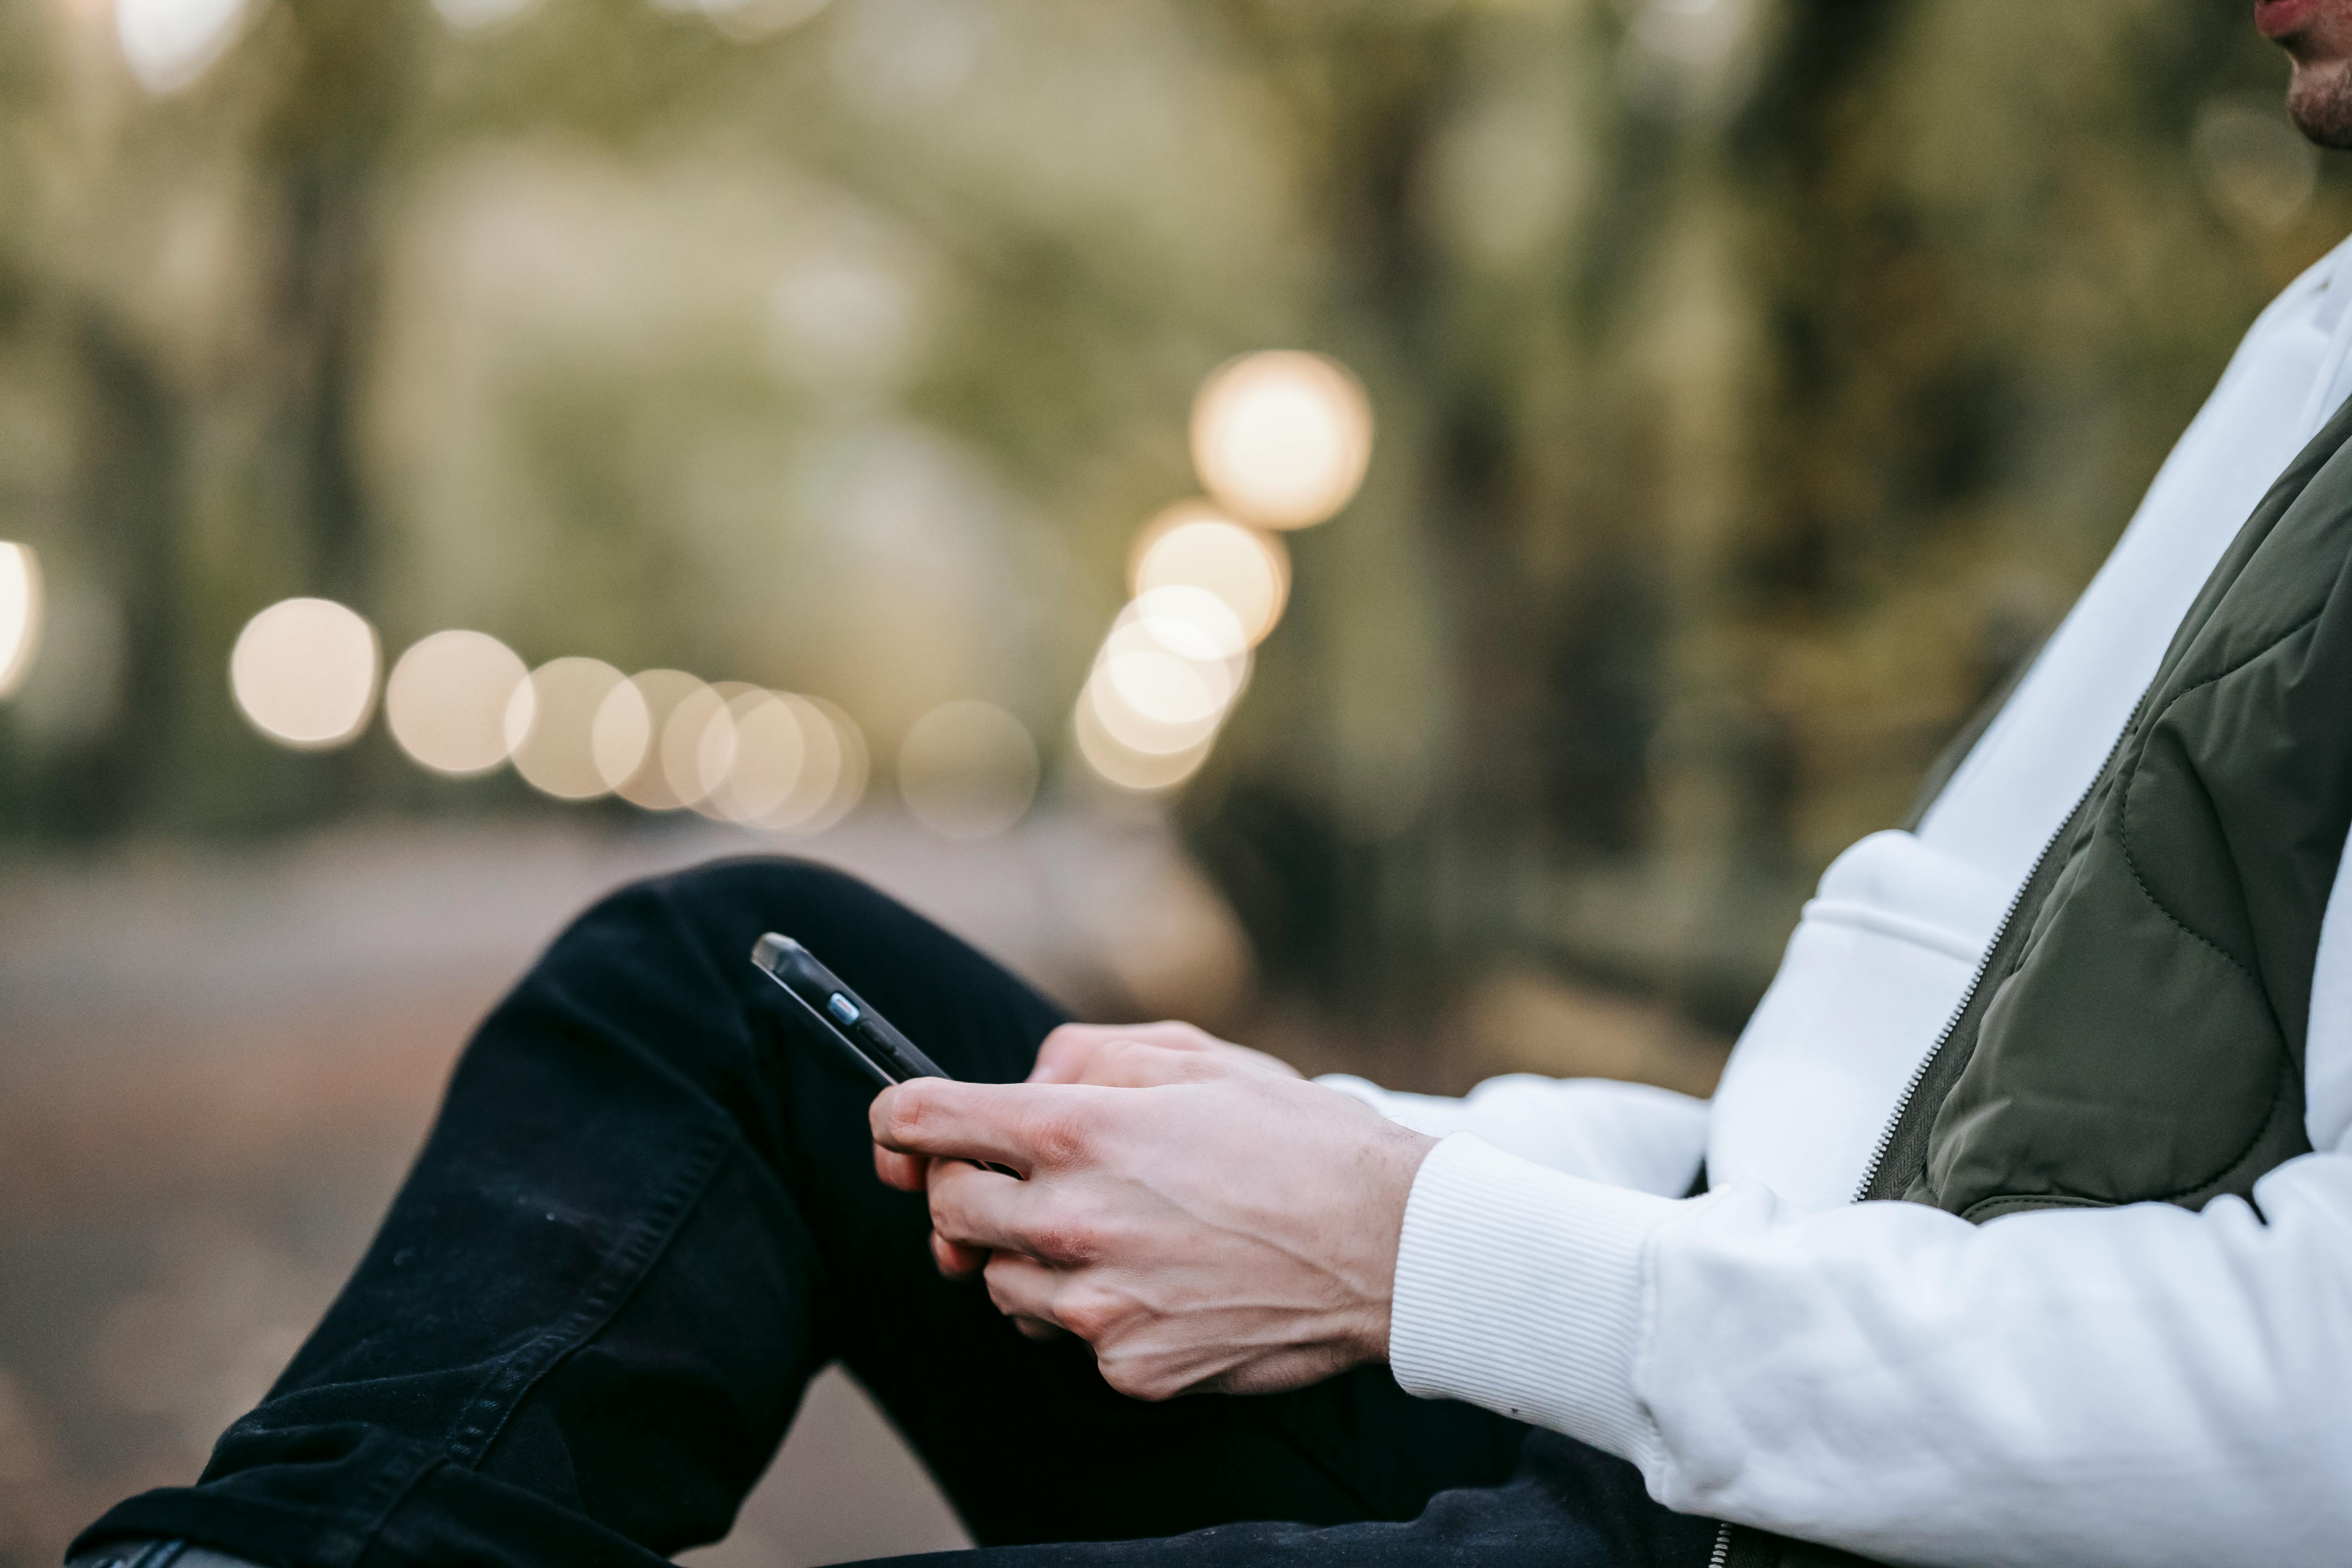 A man texting on his phone | Source: Pexels